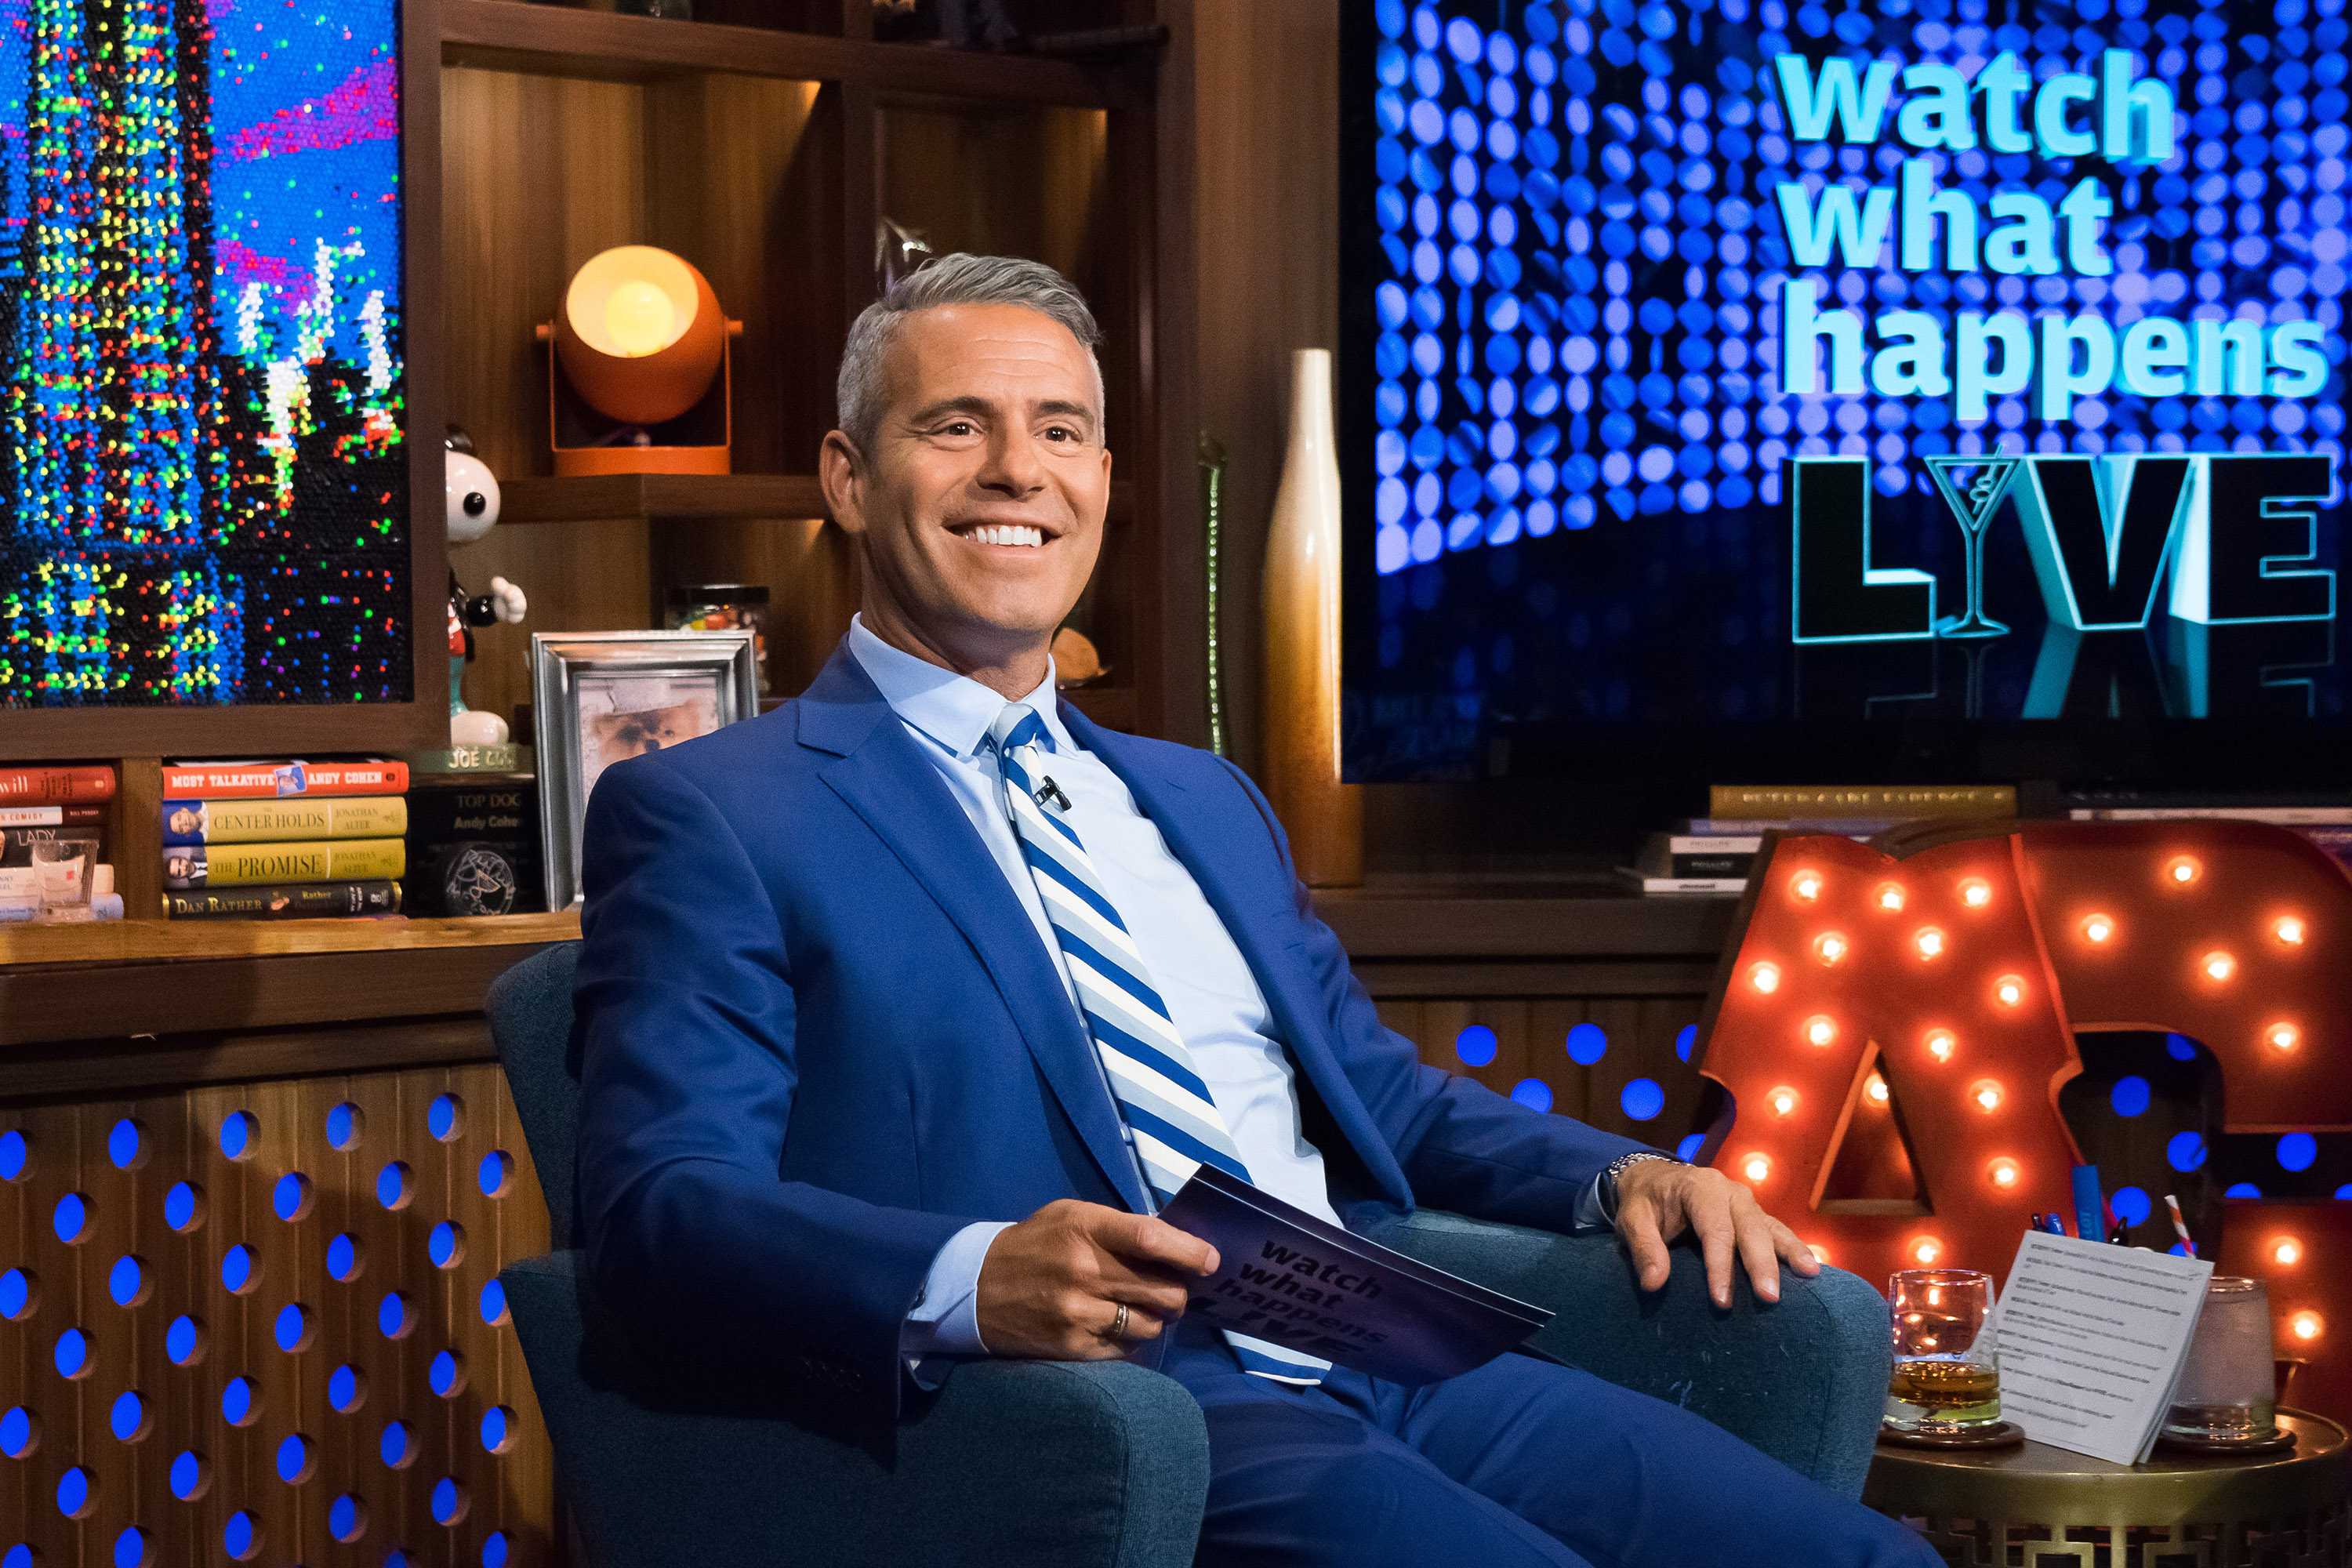 Andy Cohen on season 13 of "Watch What Happens Live" on September 7, 2016 | Source: Getty Images